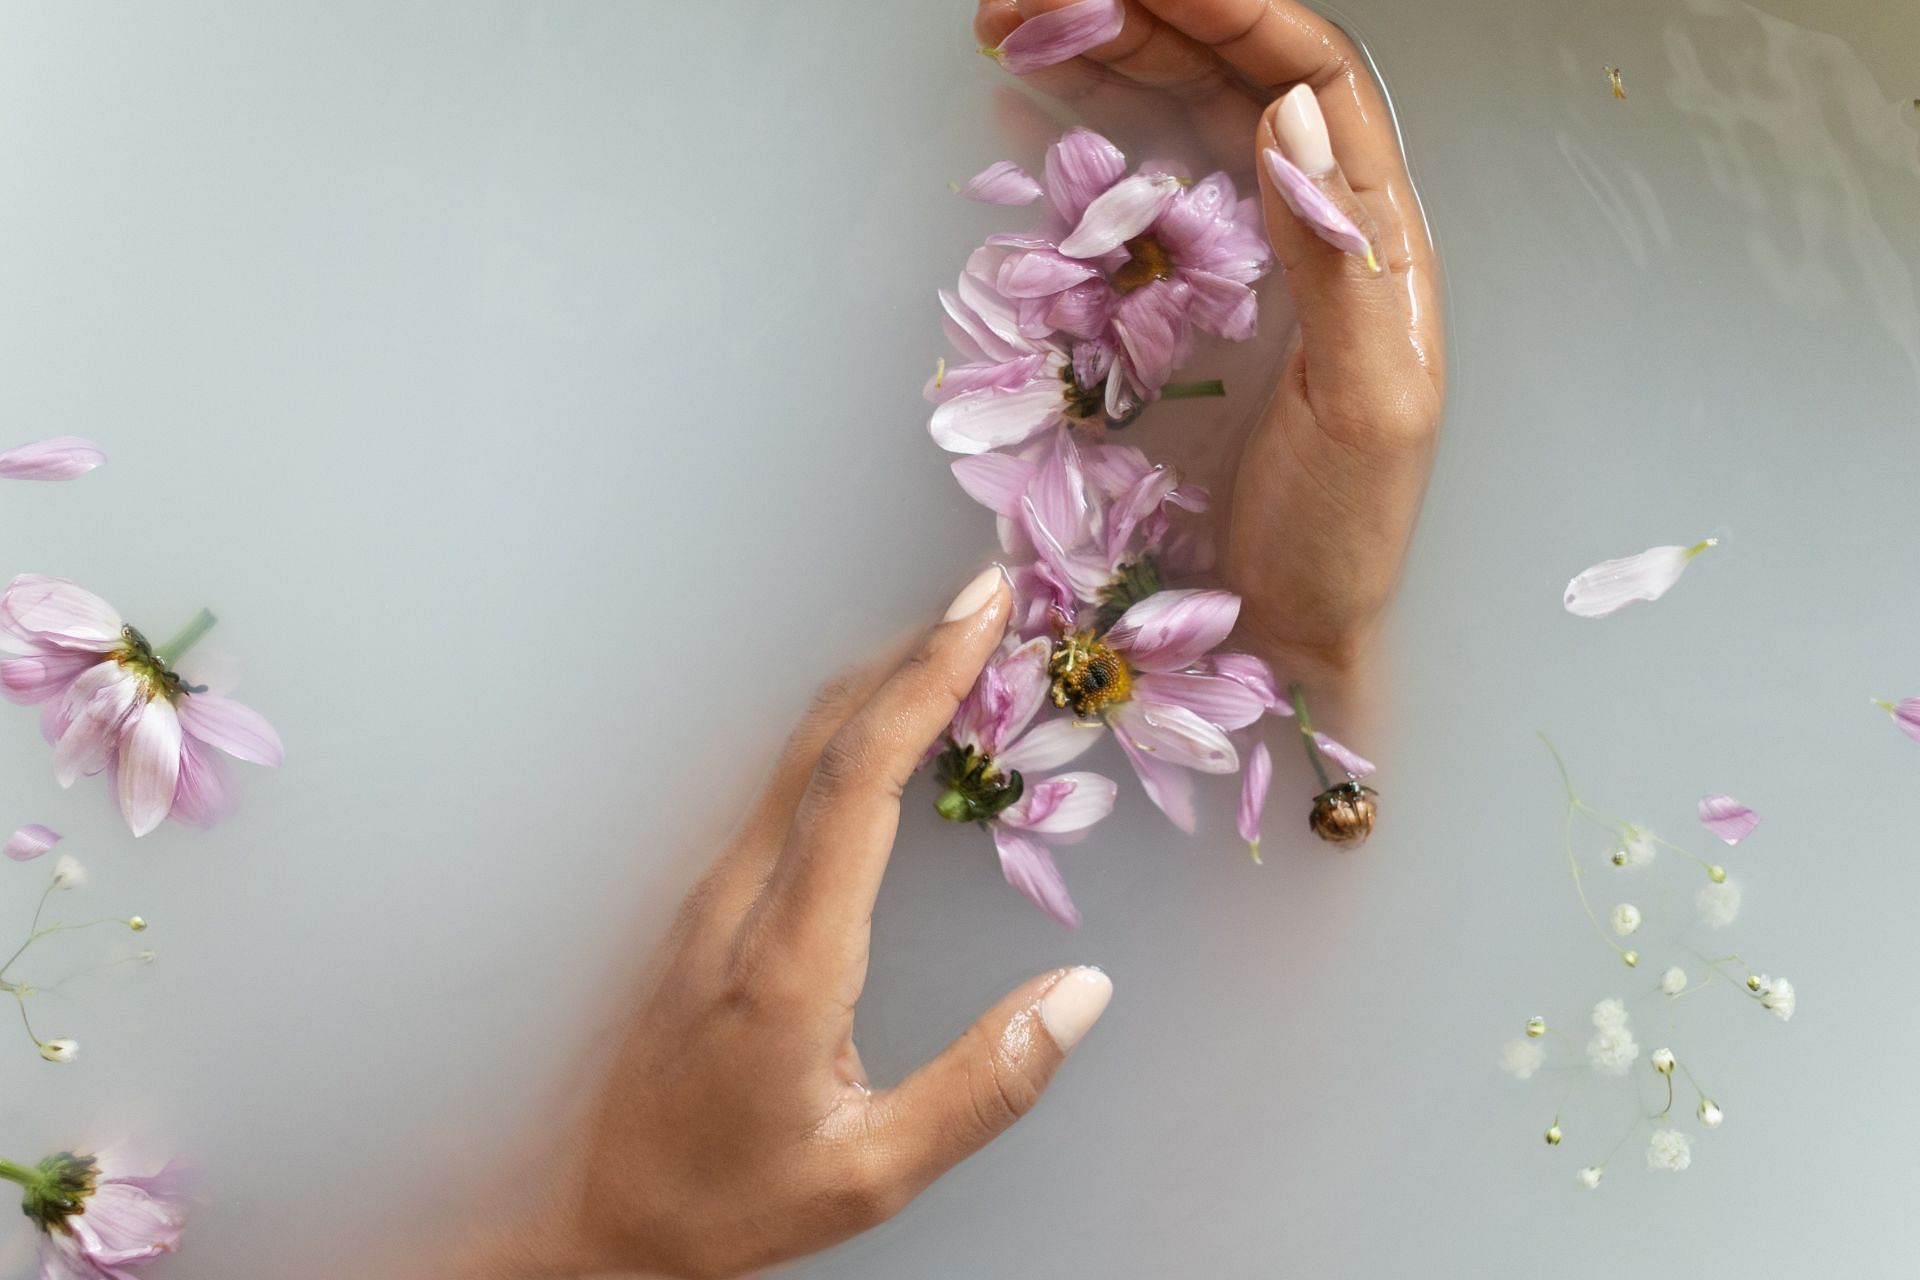 Soaking hands in warm water is one of the ways to get rid of cracked hands and feet (Image via Pexels)